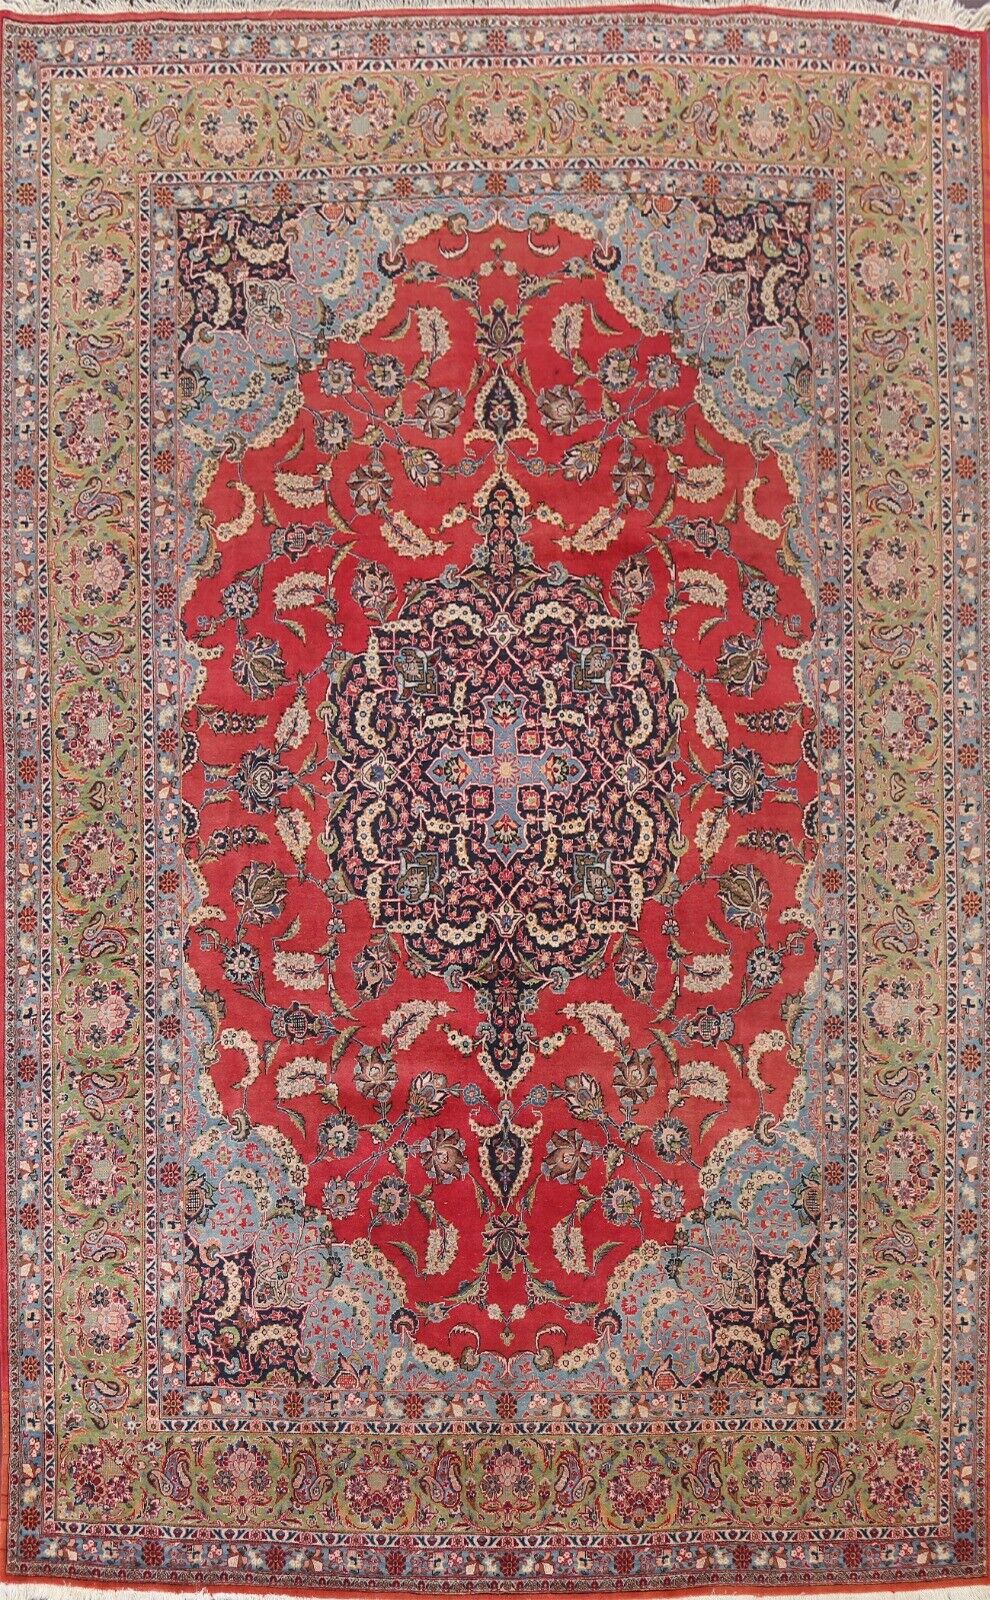 Antique Floral Ardakan Hand-knotted Area Rug Vegetable Dye Oriental Carpet 9x13